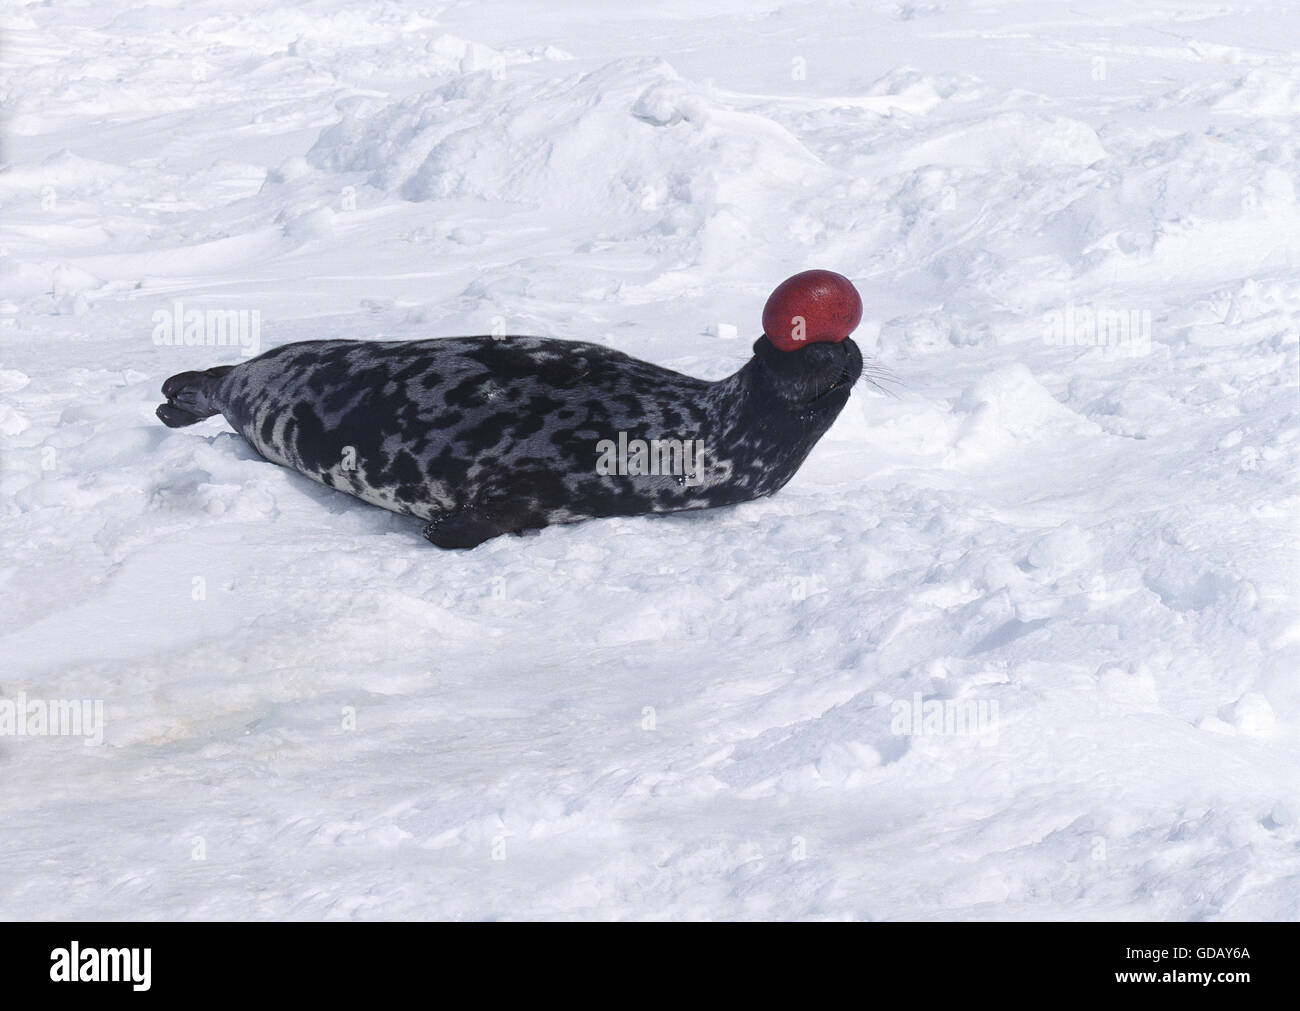 Hooded Seal, cystophora cristata, Male on Ice Floe, The hood and membrane are used for aggression display when threatened and as a warning during the breeding season, Magdalena Island in Quebec, CanadaDA Stock Photo